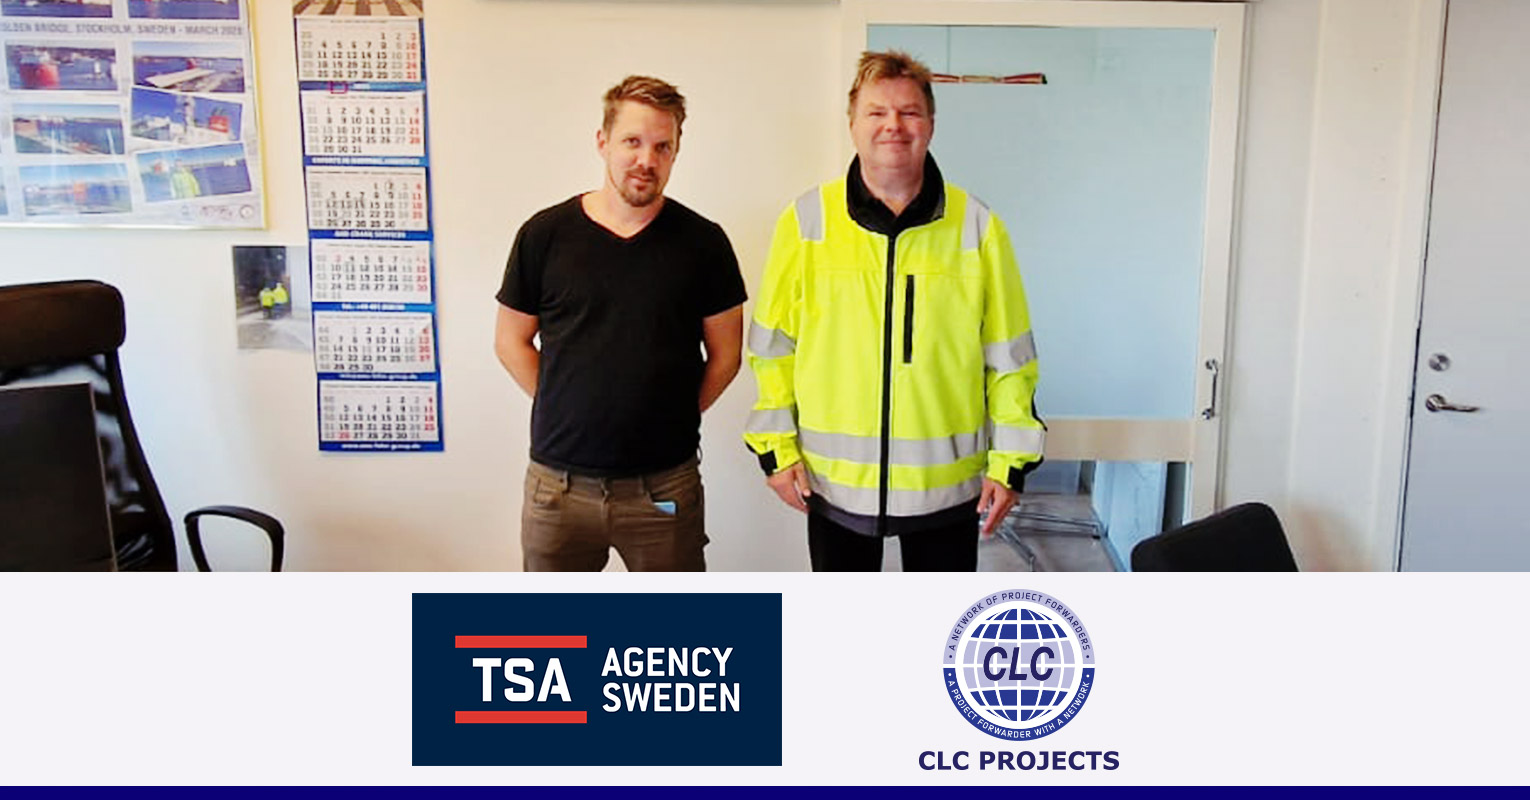 CLC Projects Chairman and Mr. Joakim Ljung of TSA Shipping Agency in Gävle, Sweden